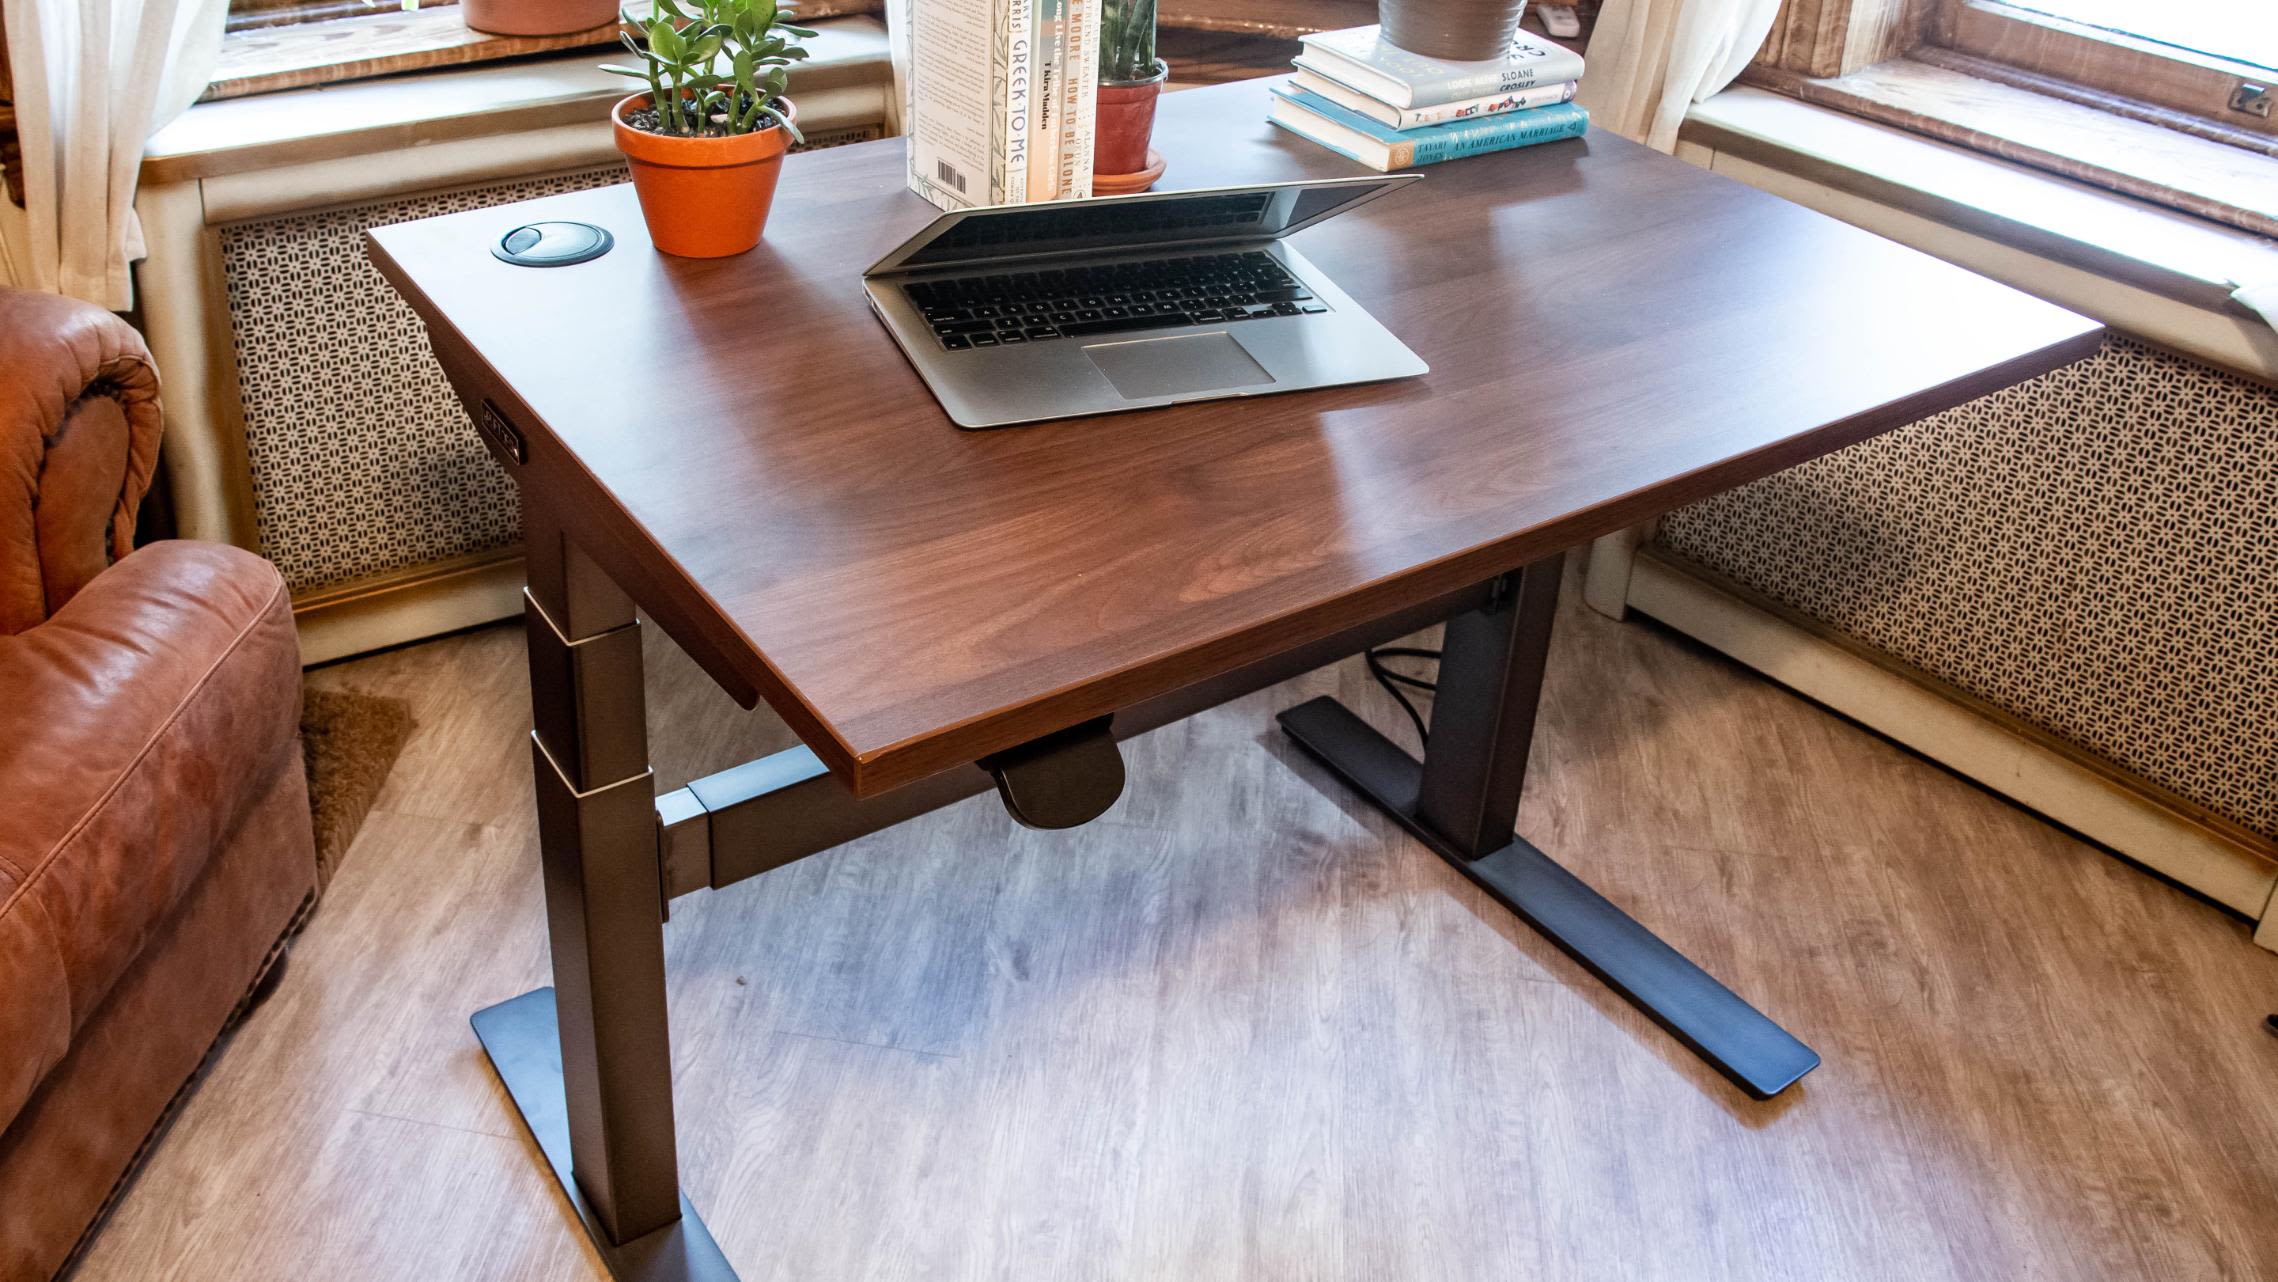 8 Home Office Essentials That'll Supercharge Your Productivity